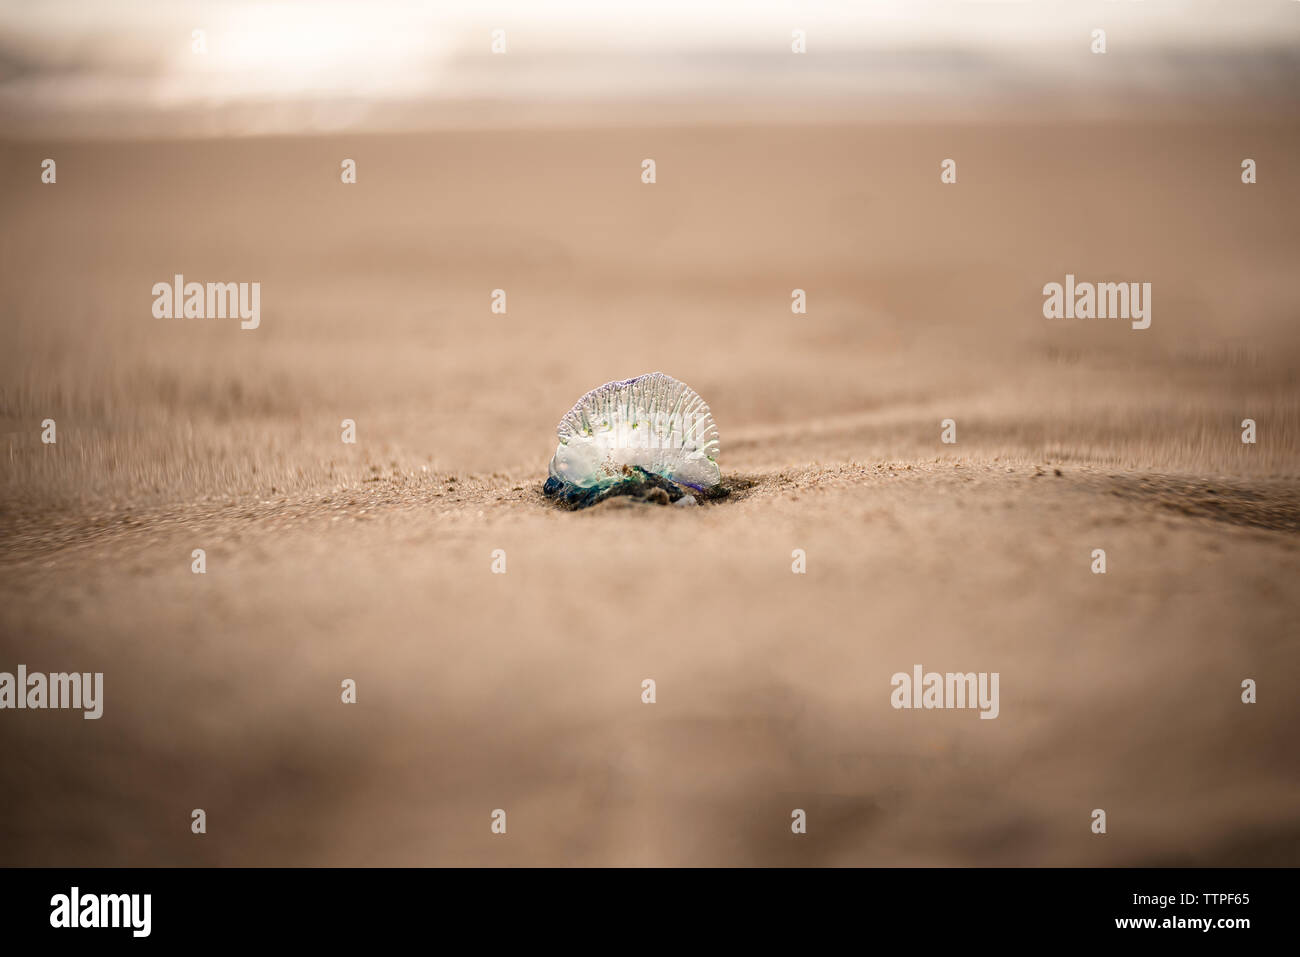 Small Portuguese man o' war Bluebottle jellyfish on sand at beach Stock Photo